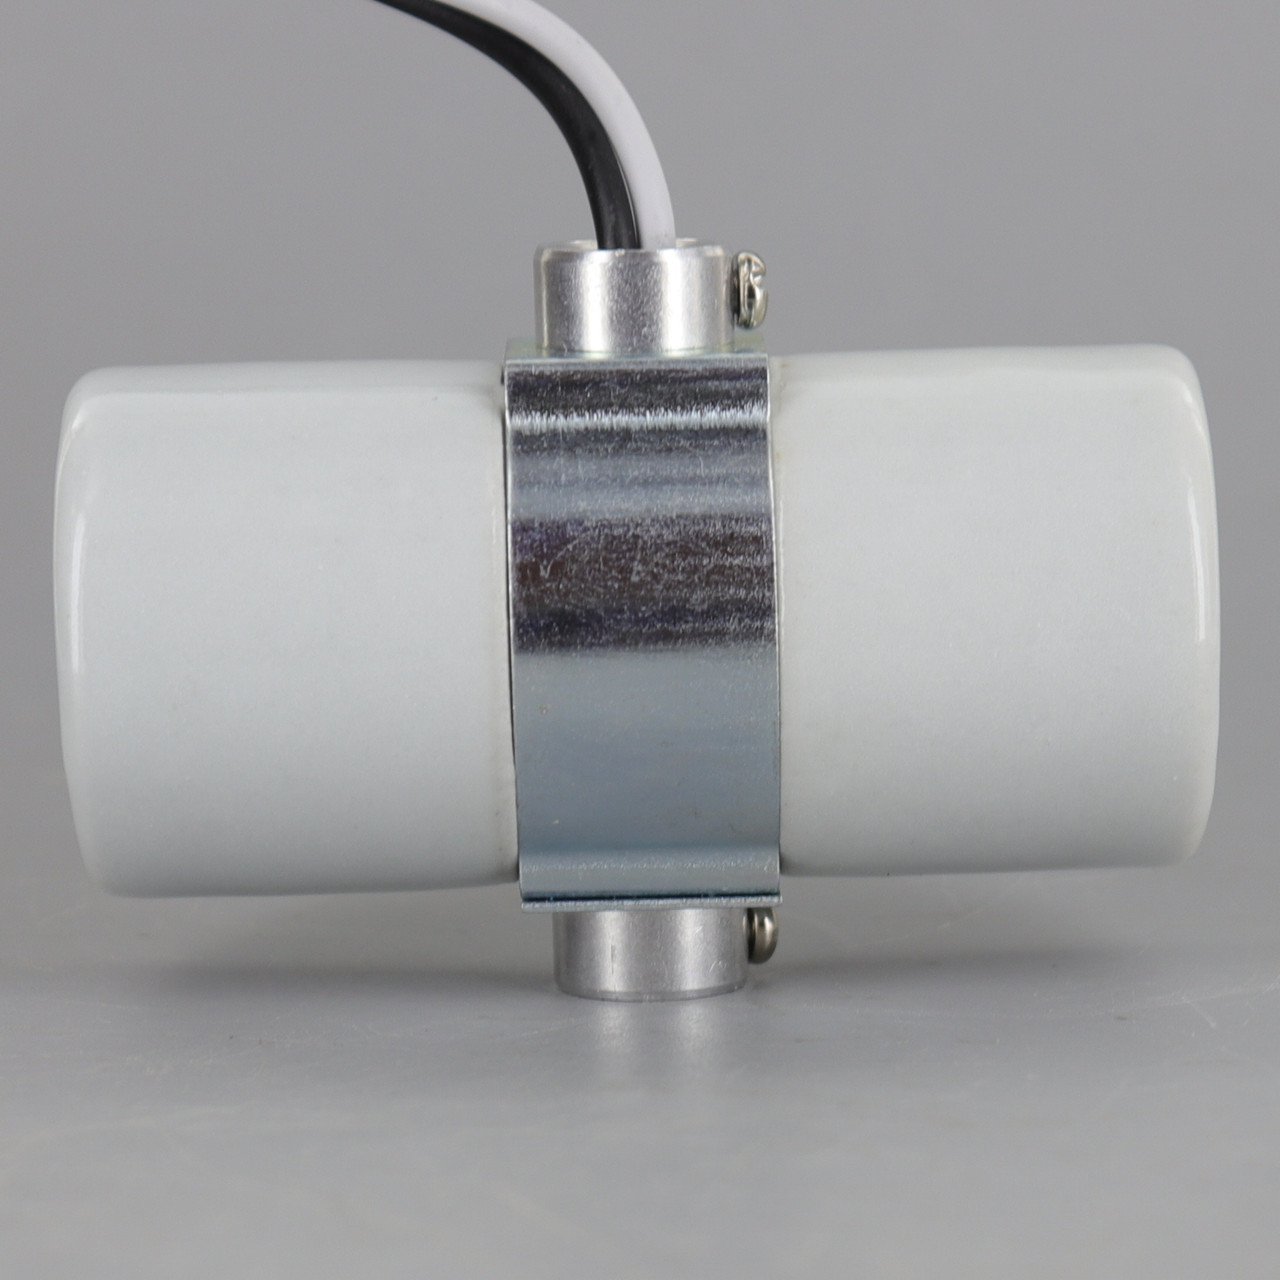 E26 Porcelain Twin Lamp Socket with 1/8ips Threaded Bushings and Pre-Wired  36in Long 18 AWG Wire Lea